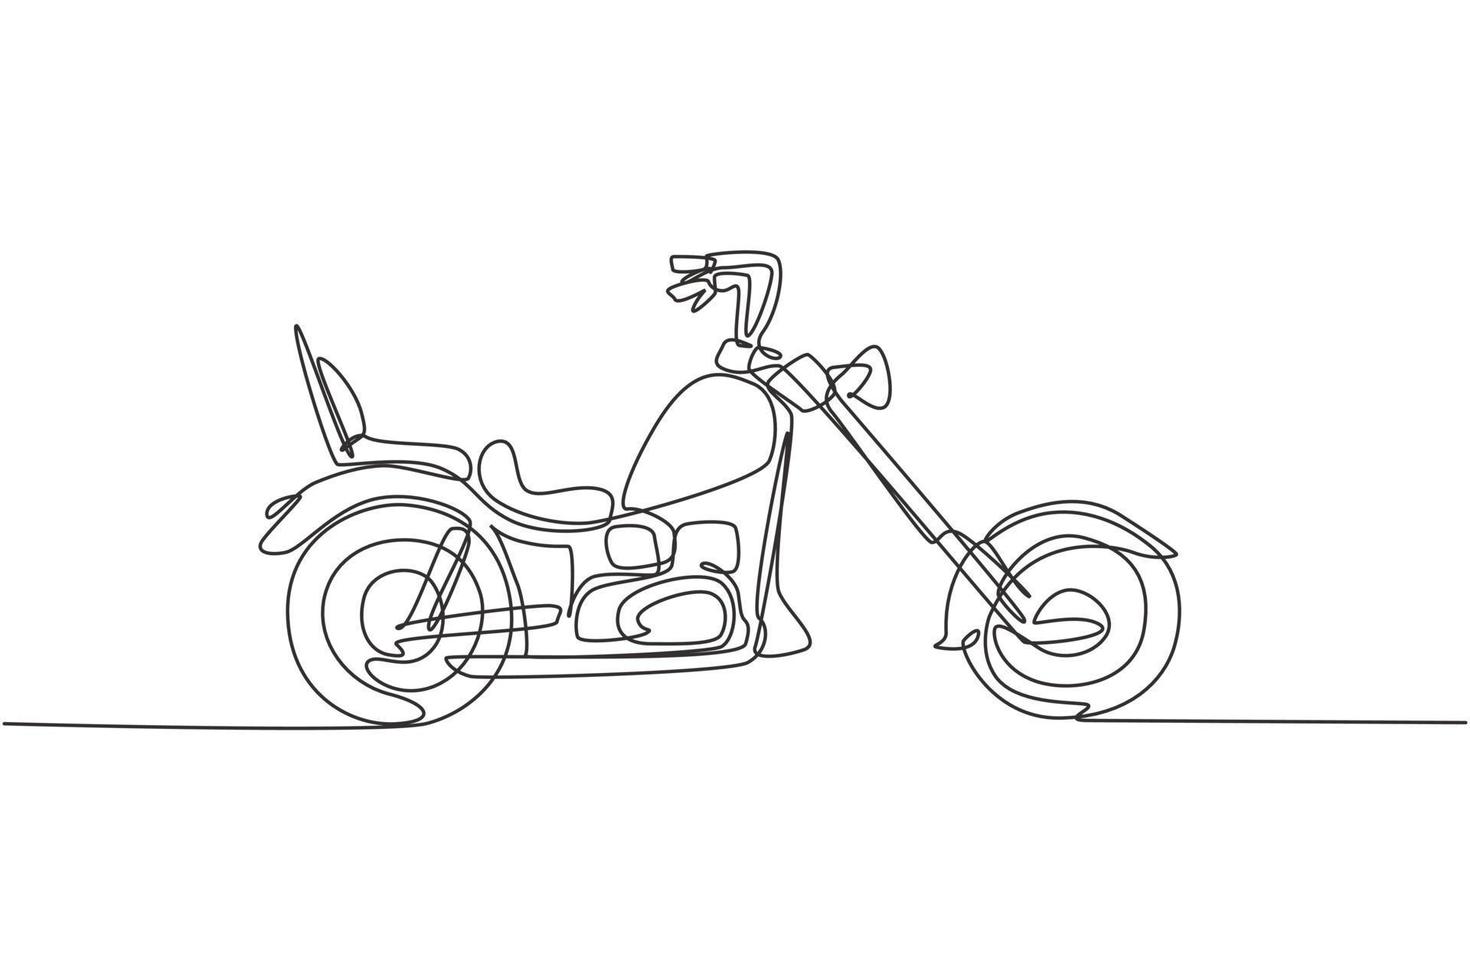 One single line drawing of old retro vintage chopper motorcycle. Vintage motorbike transportation concept continuous line graphic draw design vector illustration